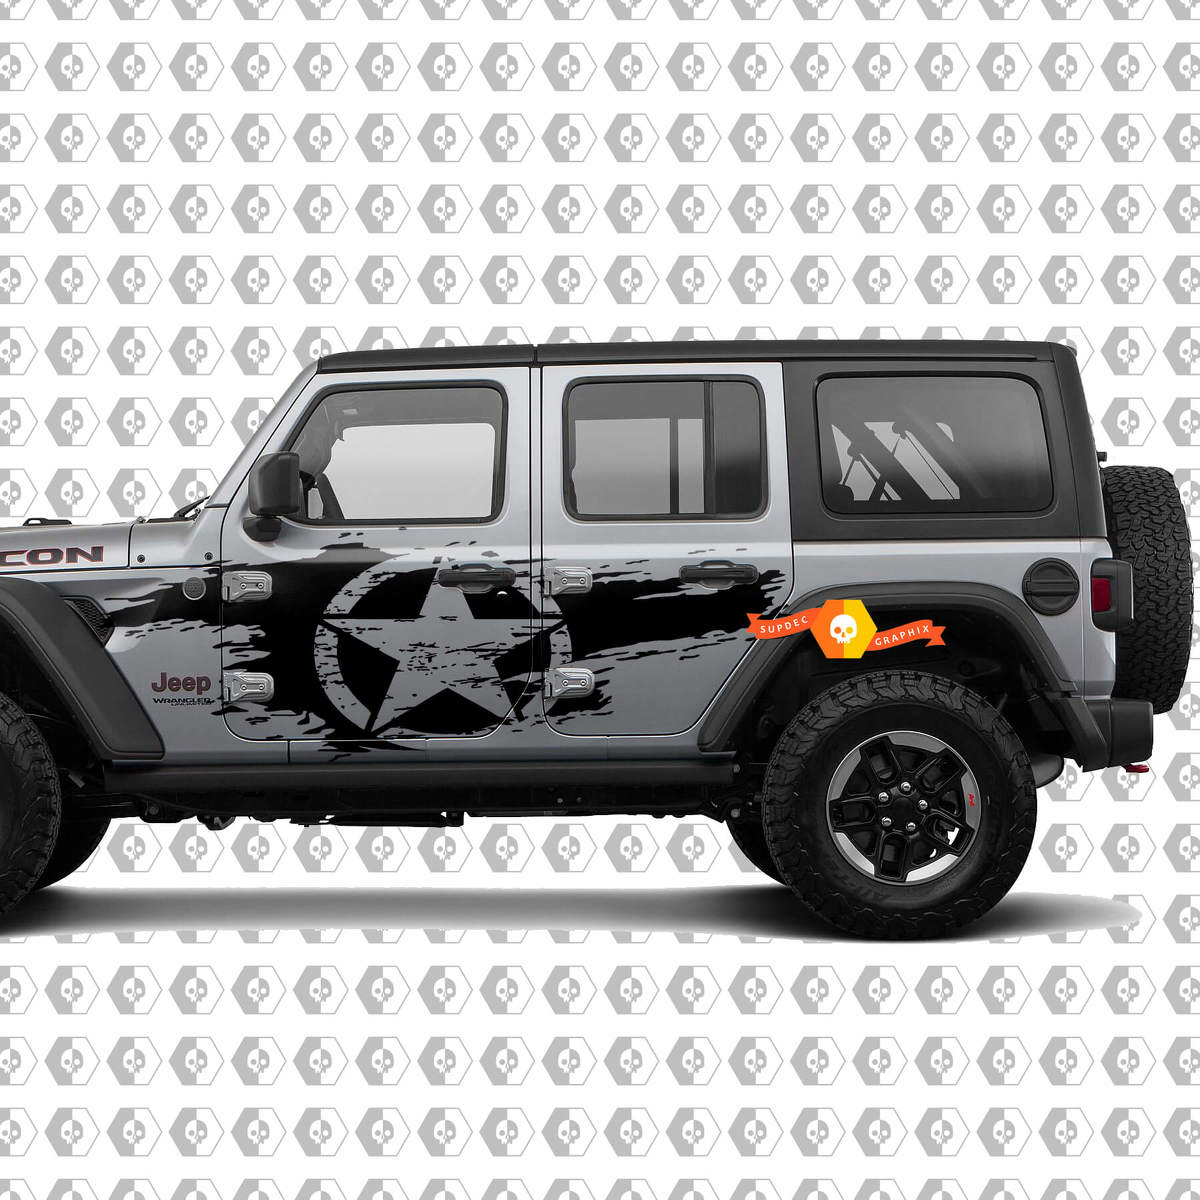 Pair of Jeep Wrangler Unlimited Wrangler JL Distressed star side body